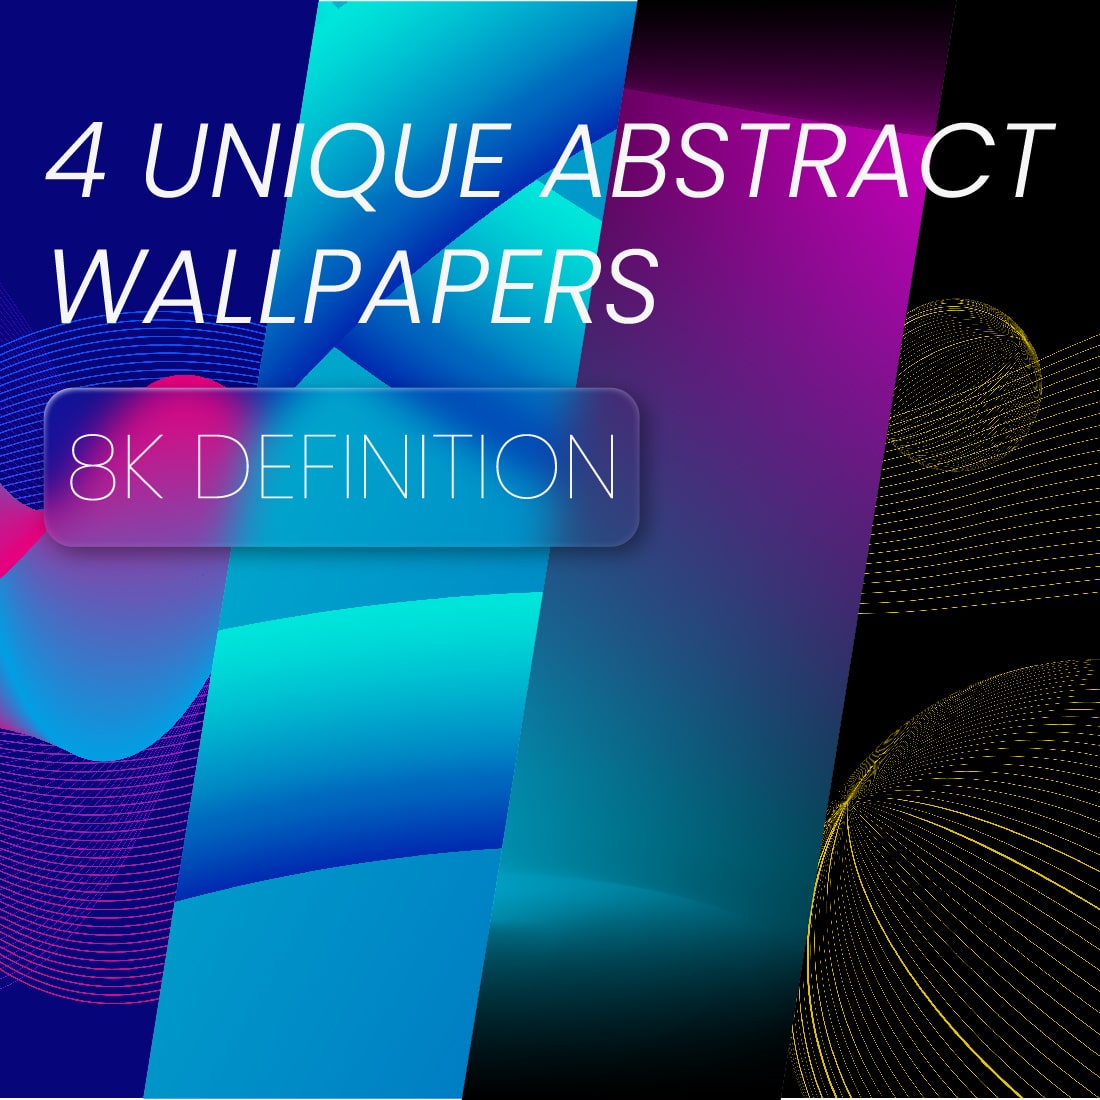 4 UNIQUE ABSTRACT WALLPAPERS IN 8K DEFINITION - MasterBundles